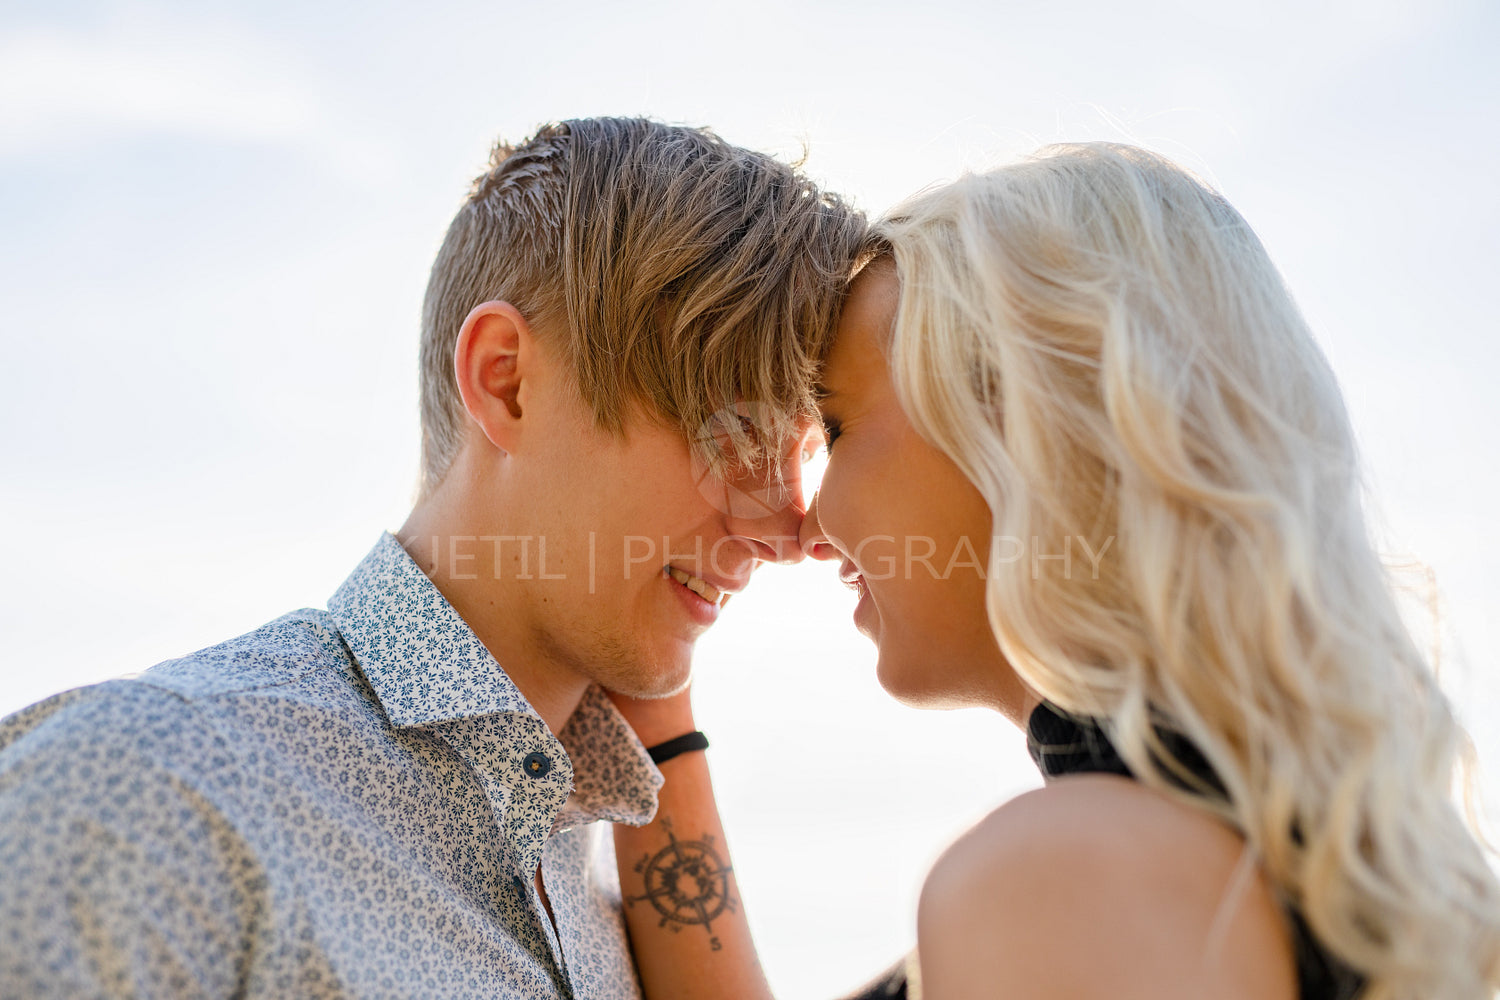 Flirting couple in romantic embrace on beach at summer